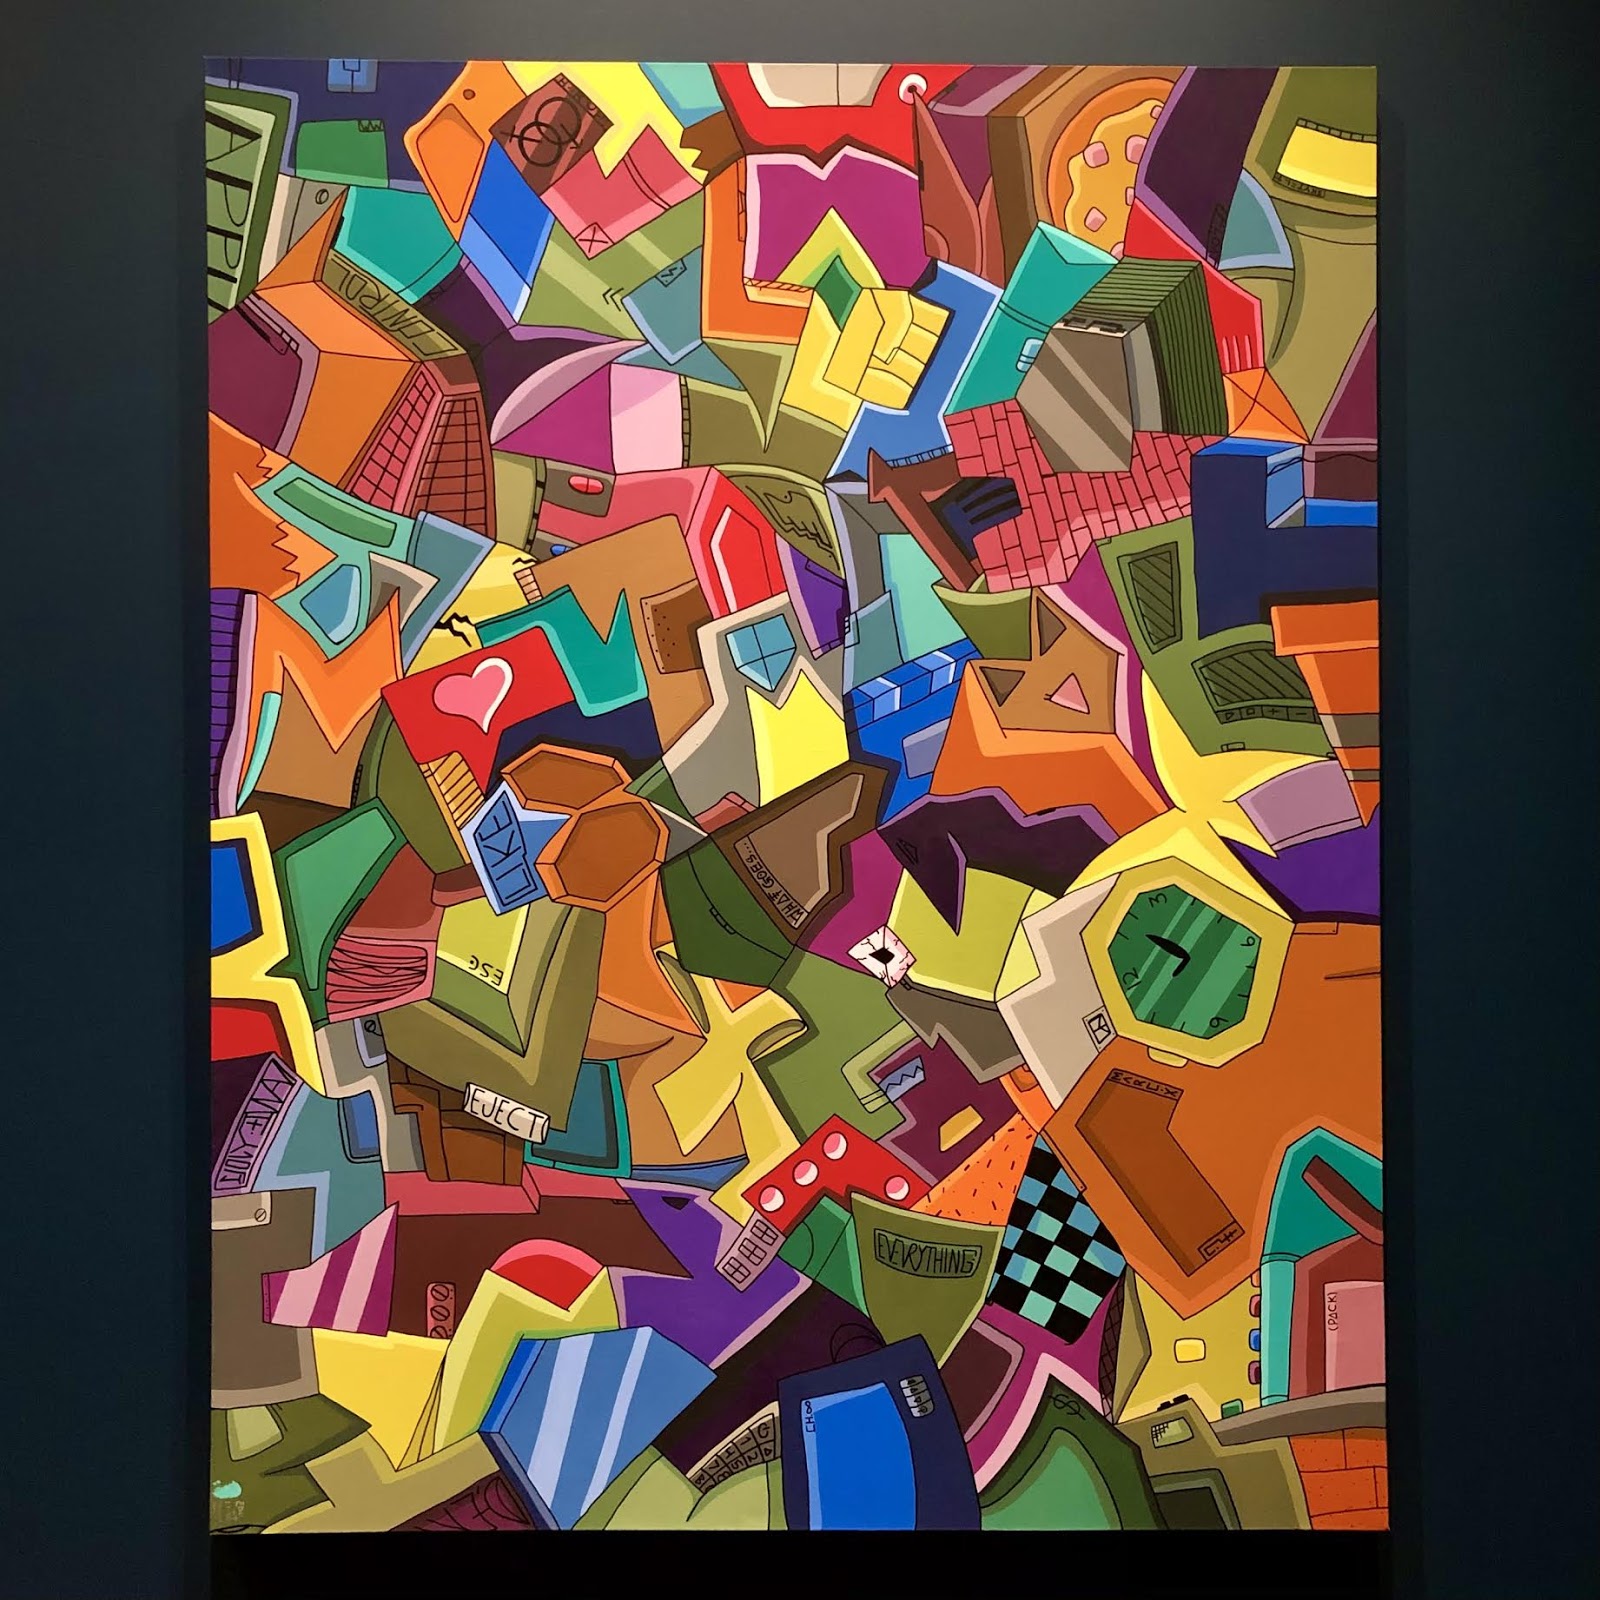 Down There, 2020, Acrylic on canvas, 48” x 60”